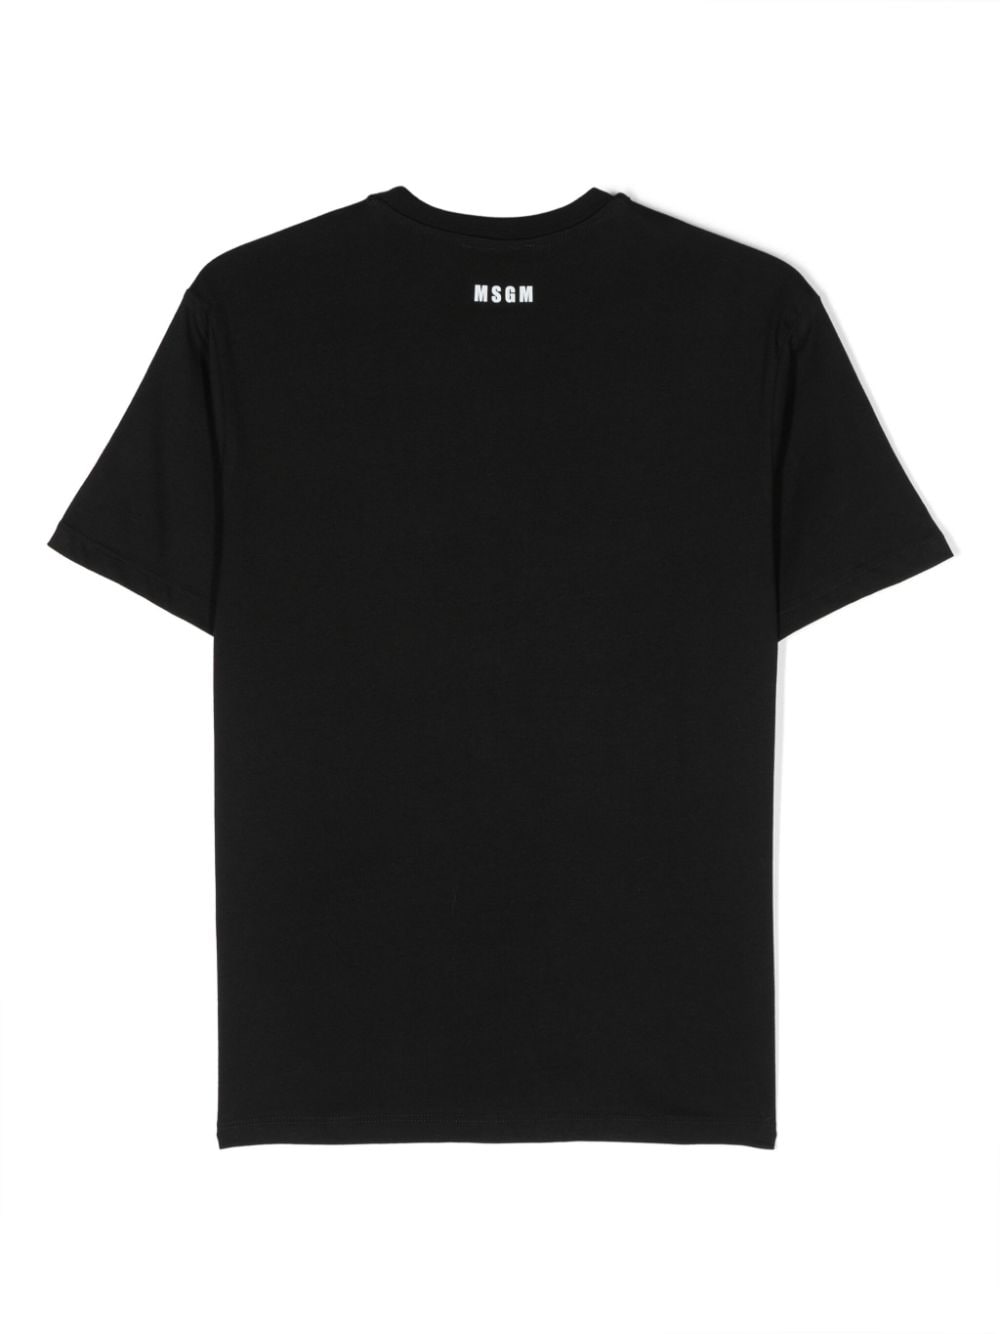 Black t-shirt for boys with print